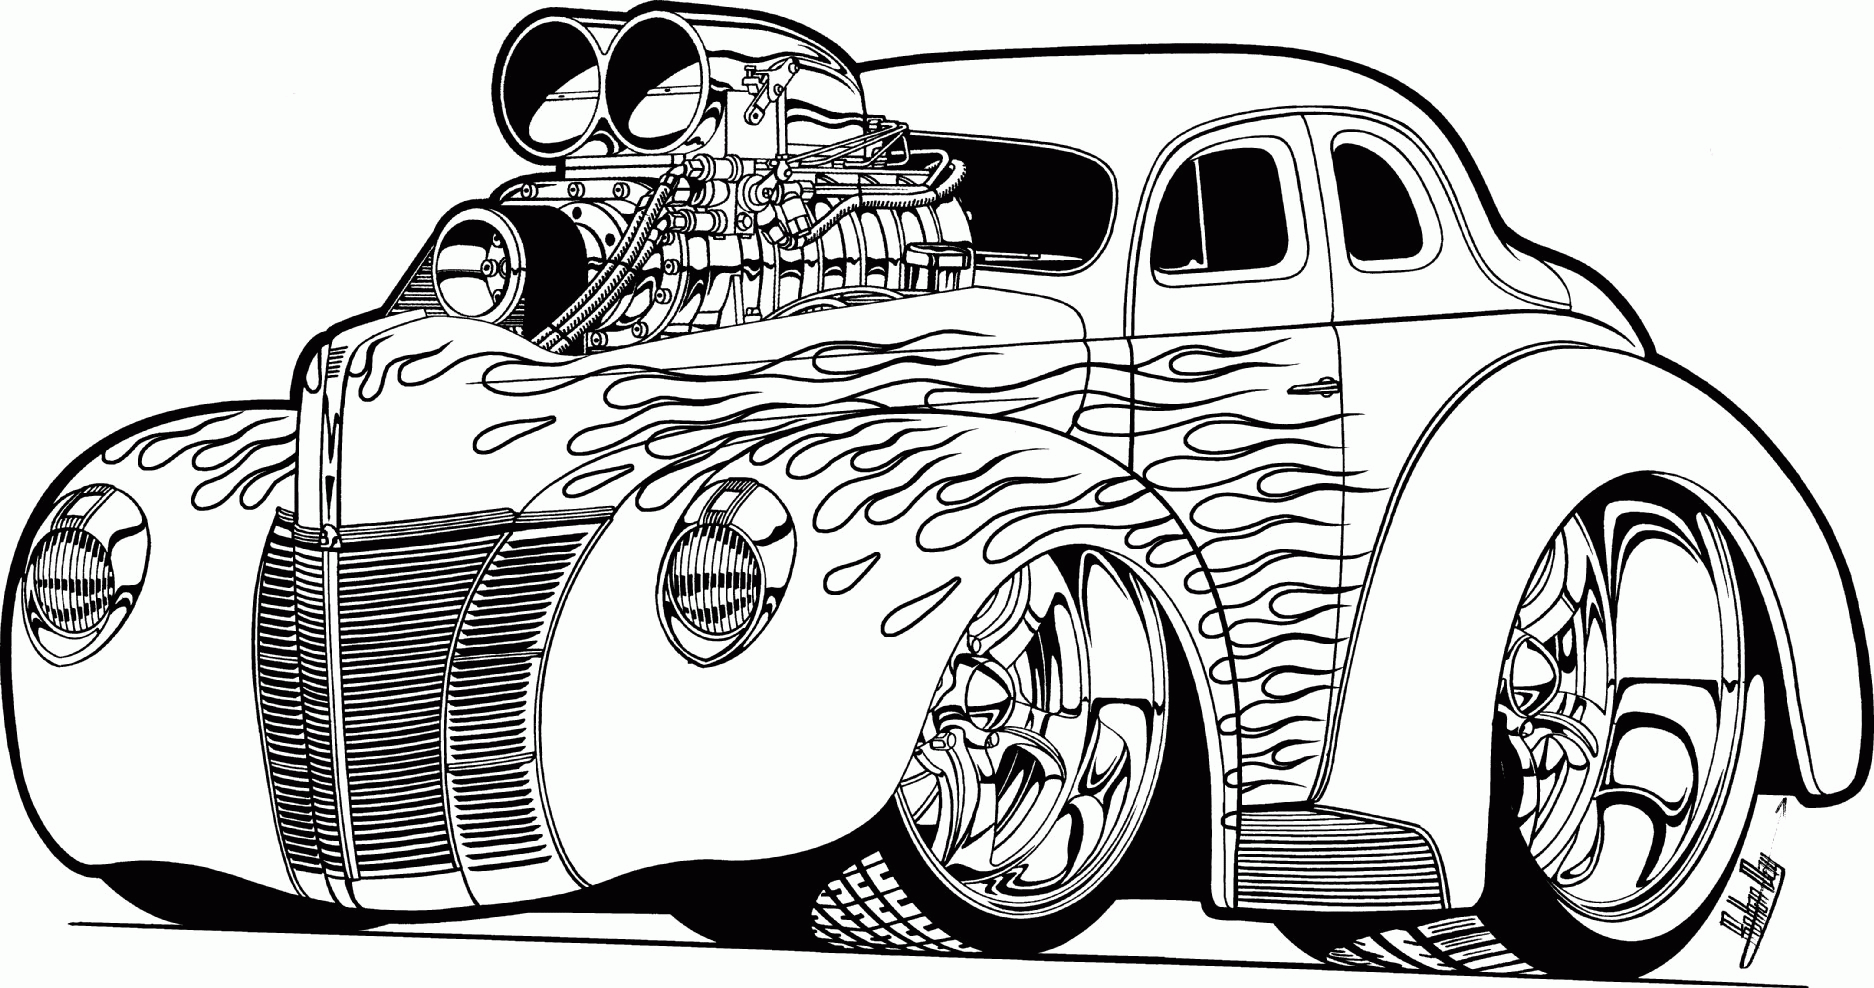 Hot Rod Coloring Pages To Print - Coloring Home